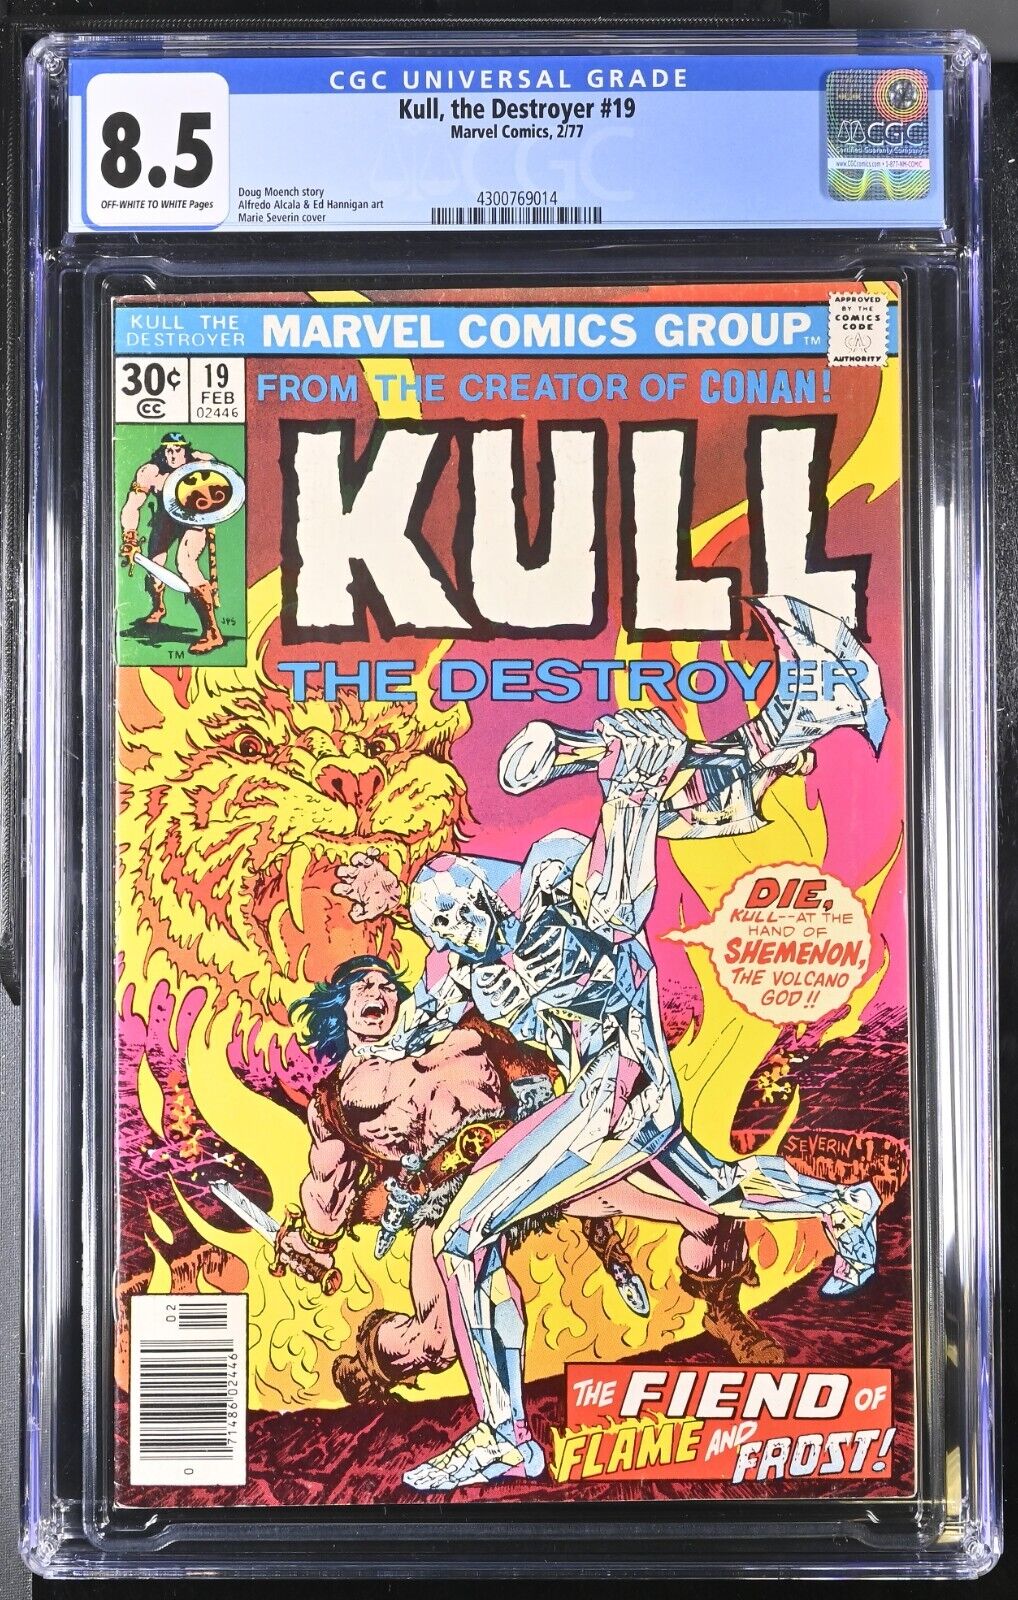 Kull the Destroyer 19 Marvel Comics 2/77 CGC 8.5 White Pages POP 17 Evel Knievel